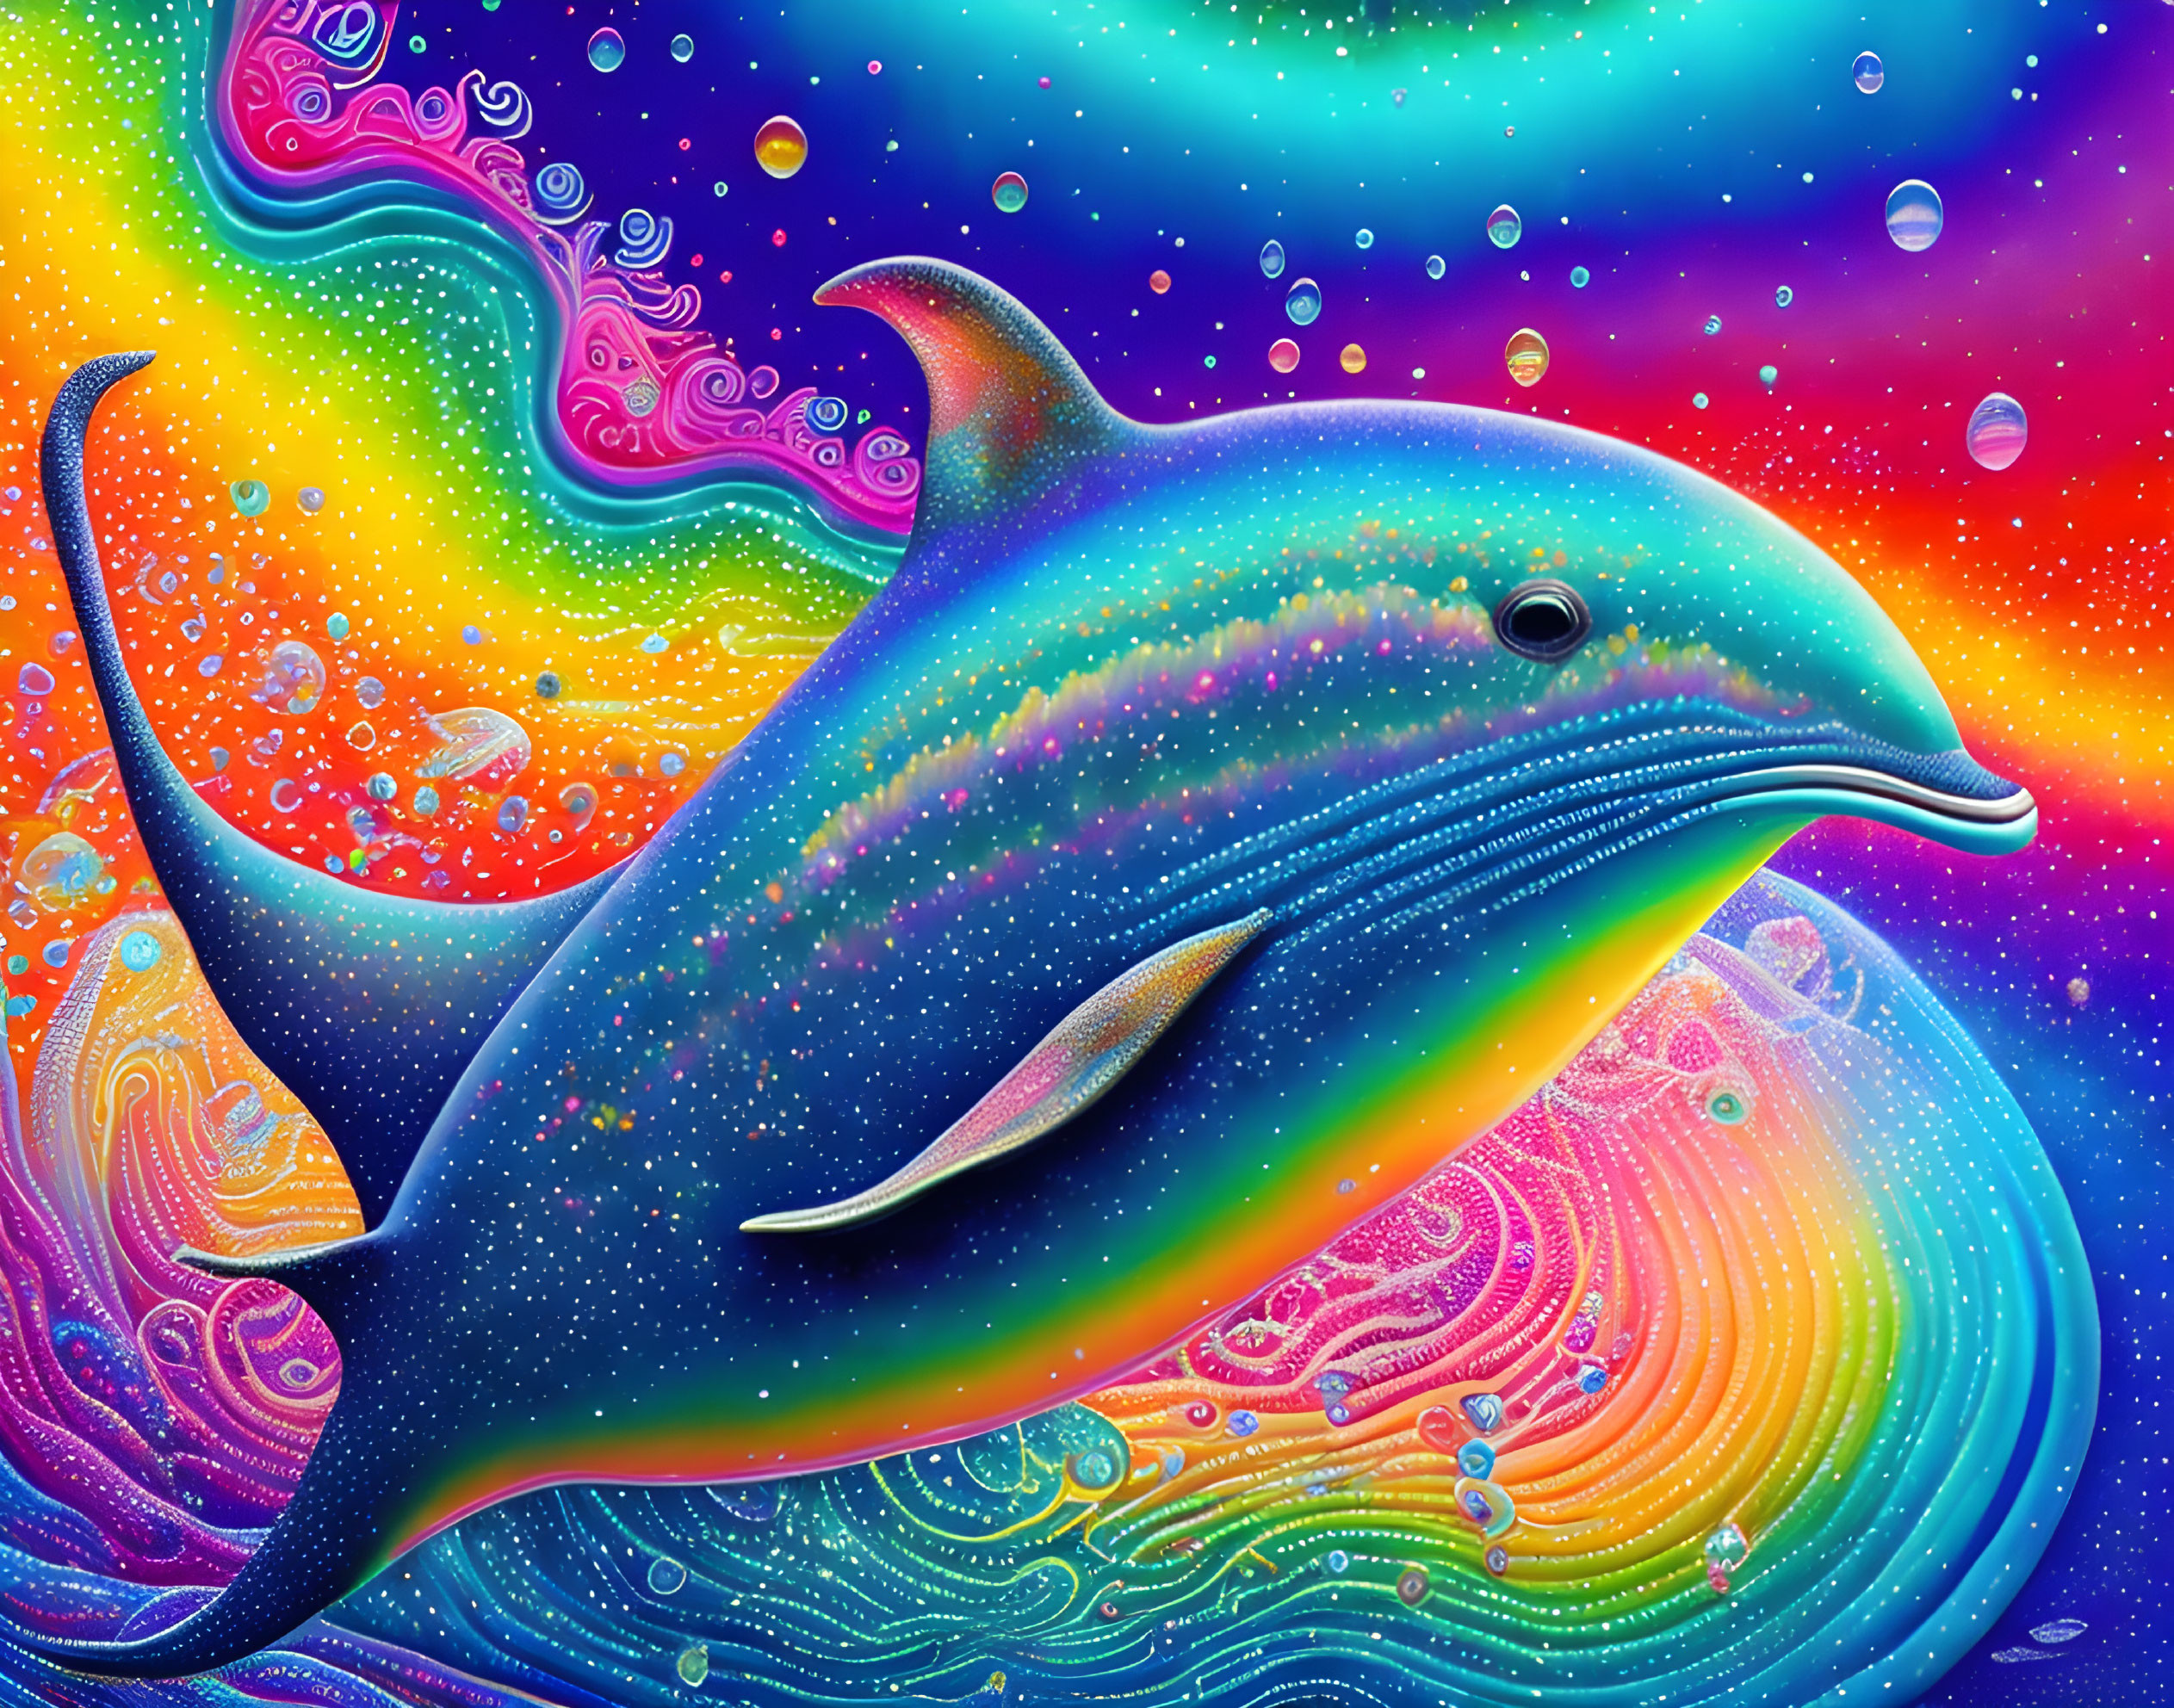 Psychedelic Dolphin/Orca hybrid in the ocean